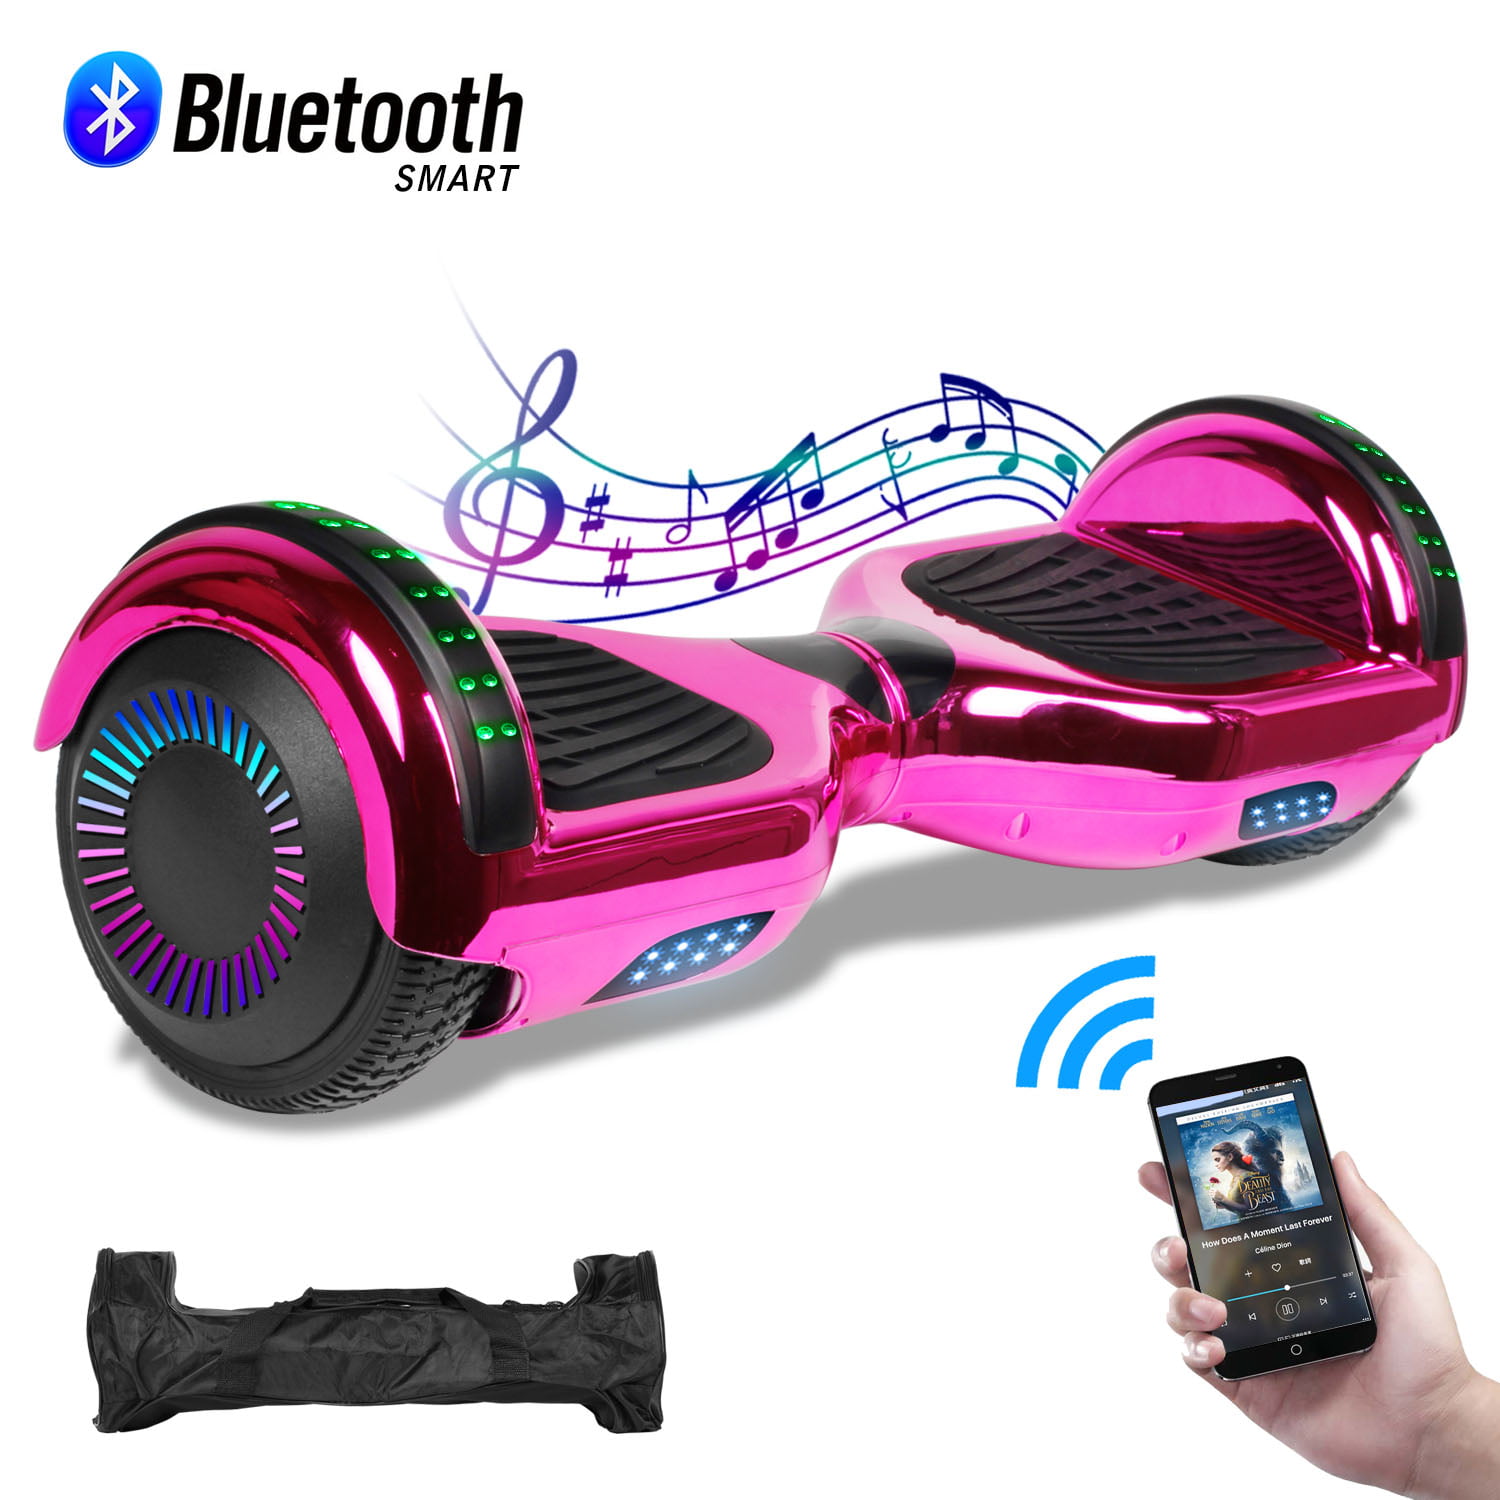 Hoverboard UL 2272 Certified Self Balancing Scooter 6.5 flashing Two-Wheel Self Balancing Hoverboard with App Bluetooth Speaker and colorful LED Lights tire Electric Scooter for Kids and Adults Gifts